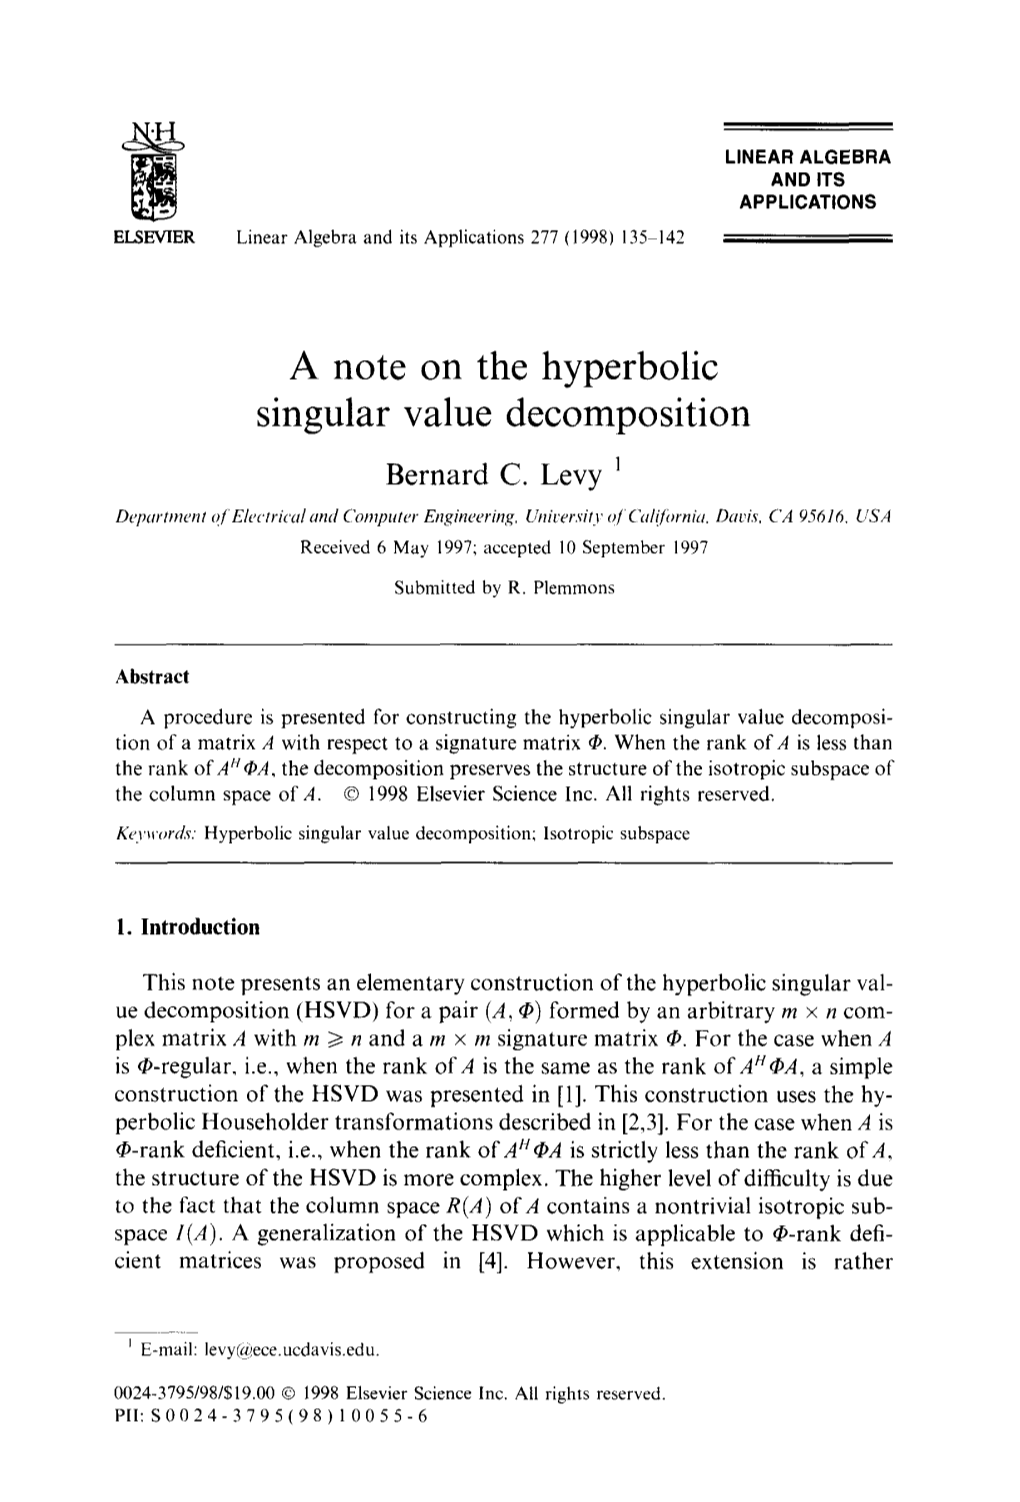 A Note on the Hyperbolic Singular Value Decomposition